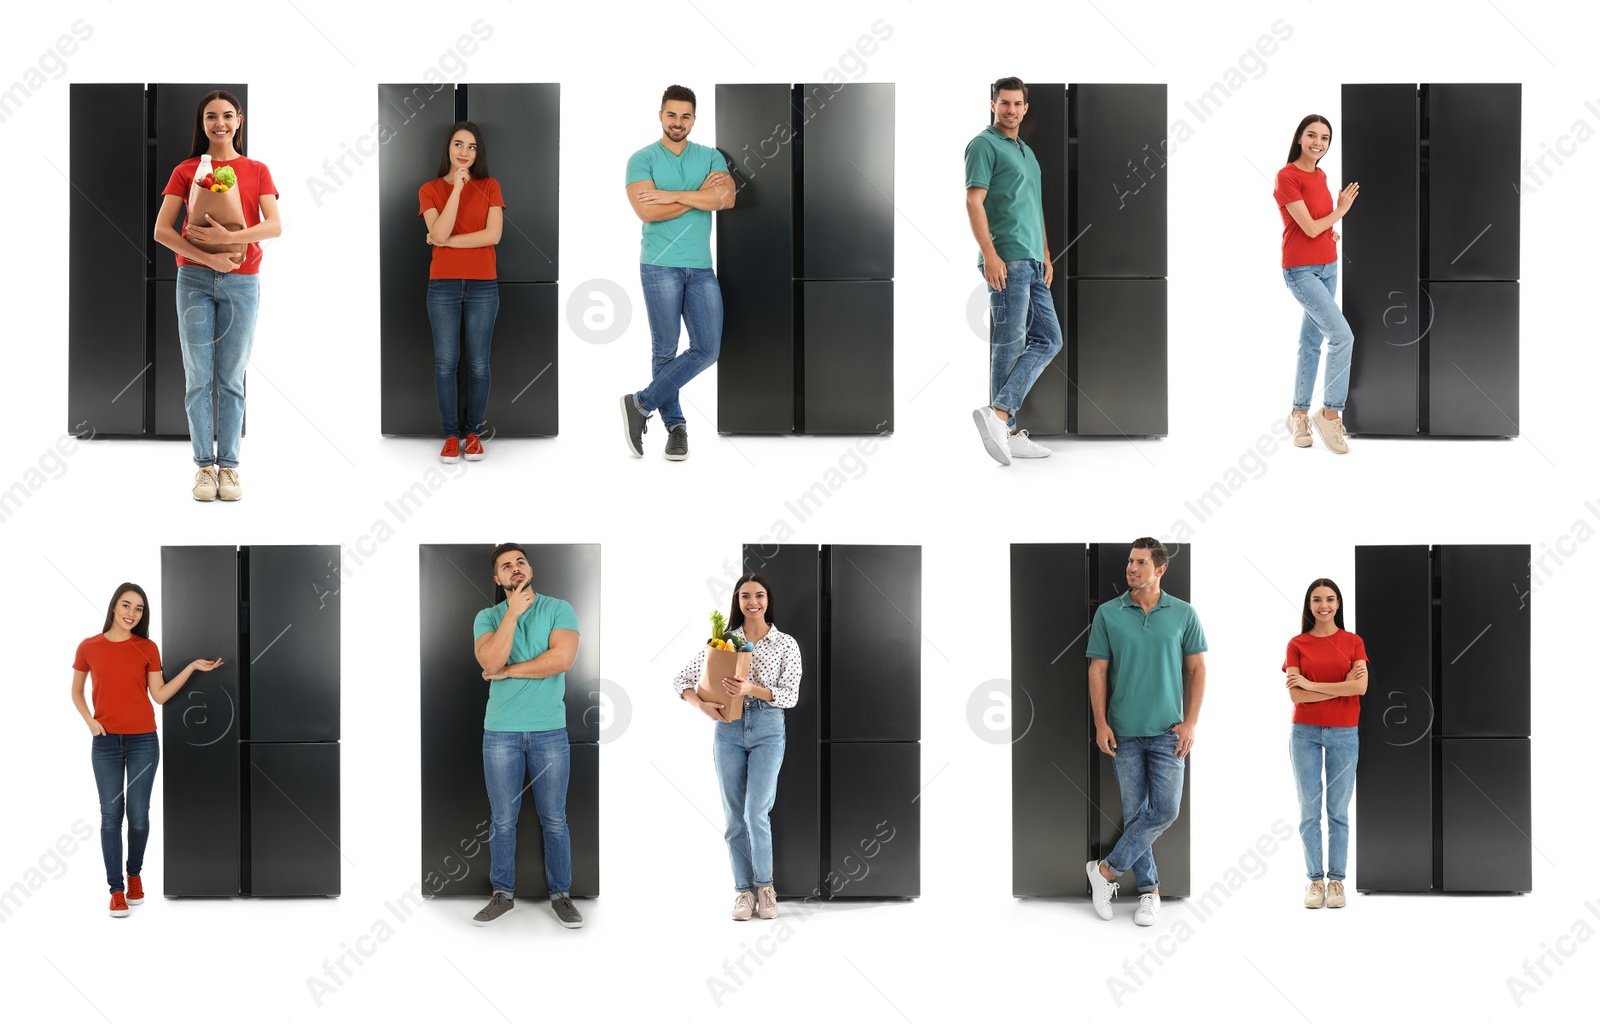 Image of Collage of people near refrigerators on white background